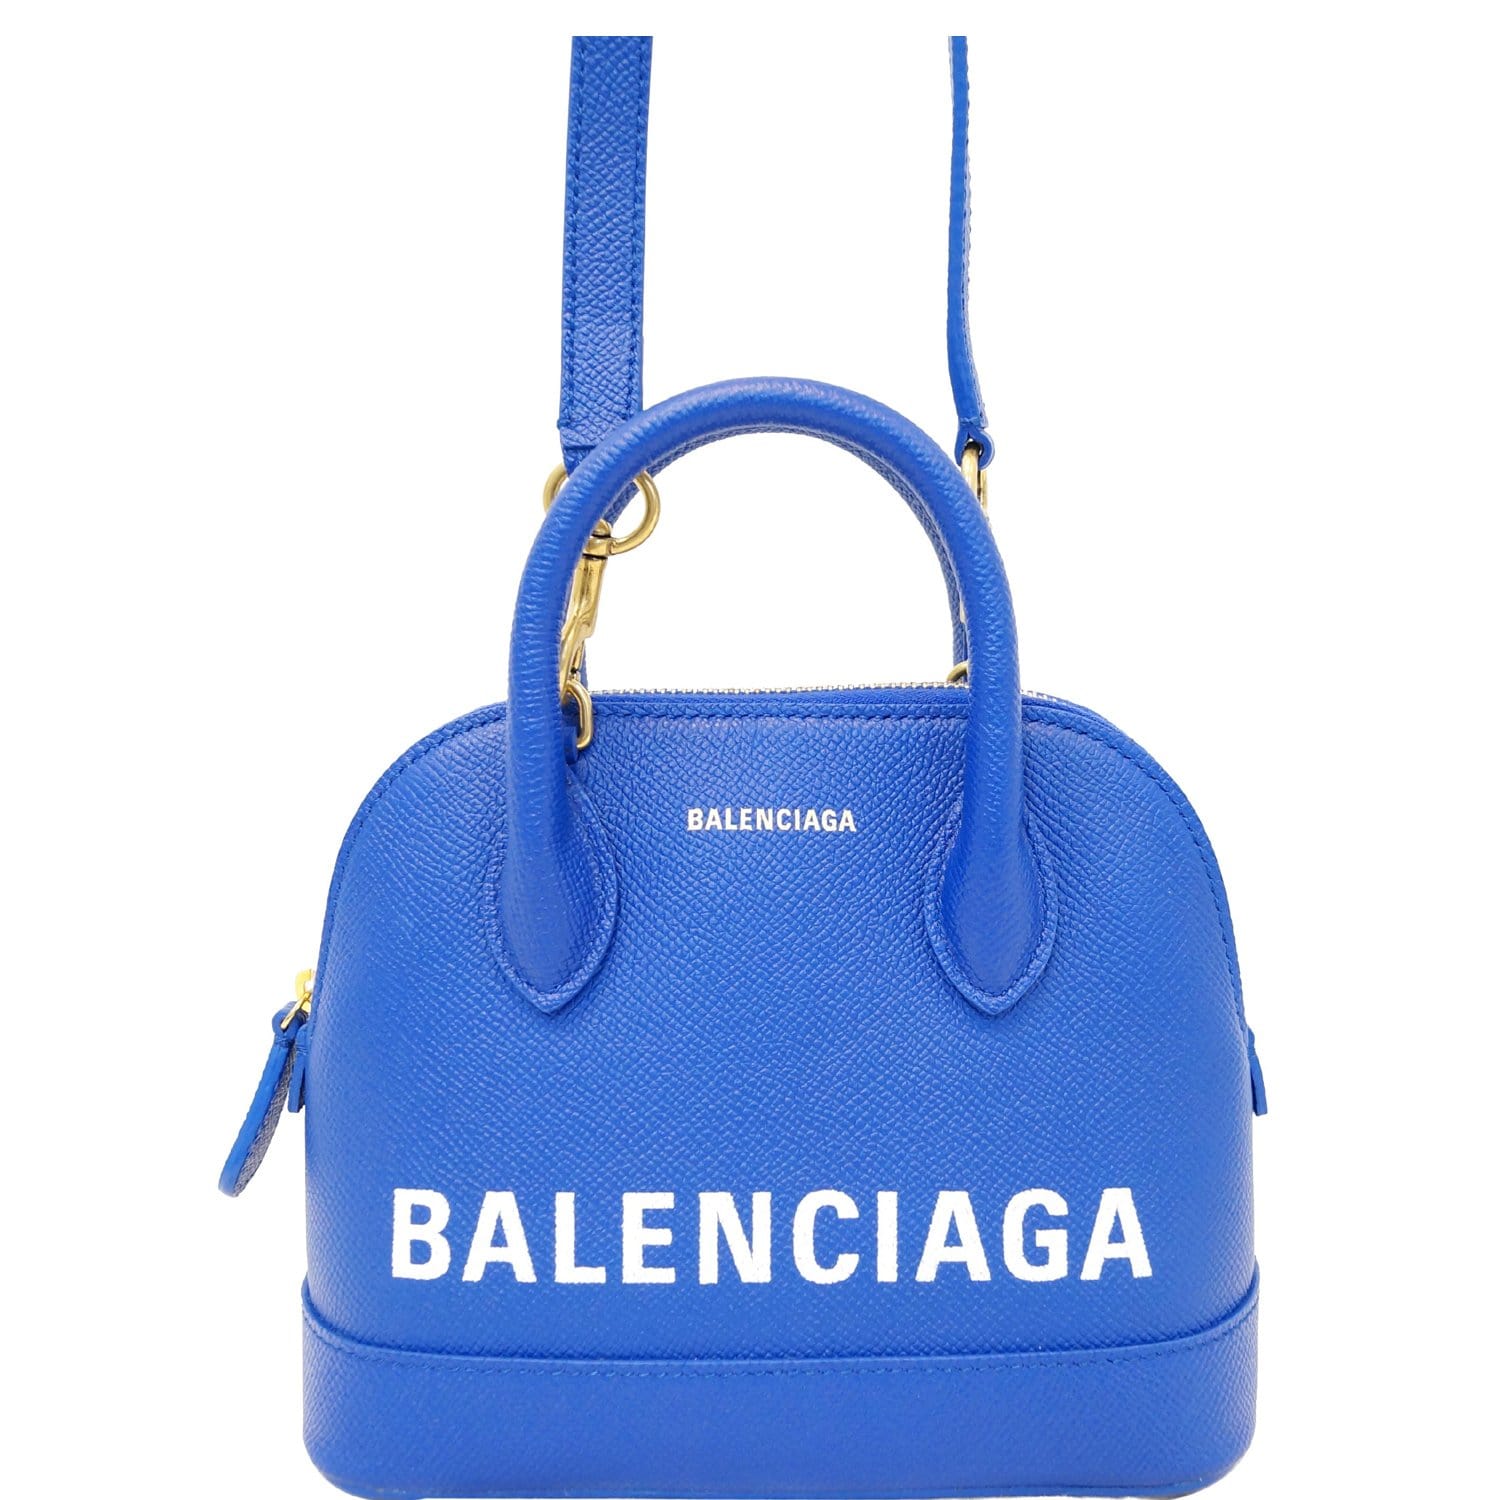 Balenciagas Arena ExtraLarge Shopper Tote Bag Looks REALLY Similar to the  Ikea Tote  Teen Vogue